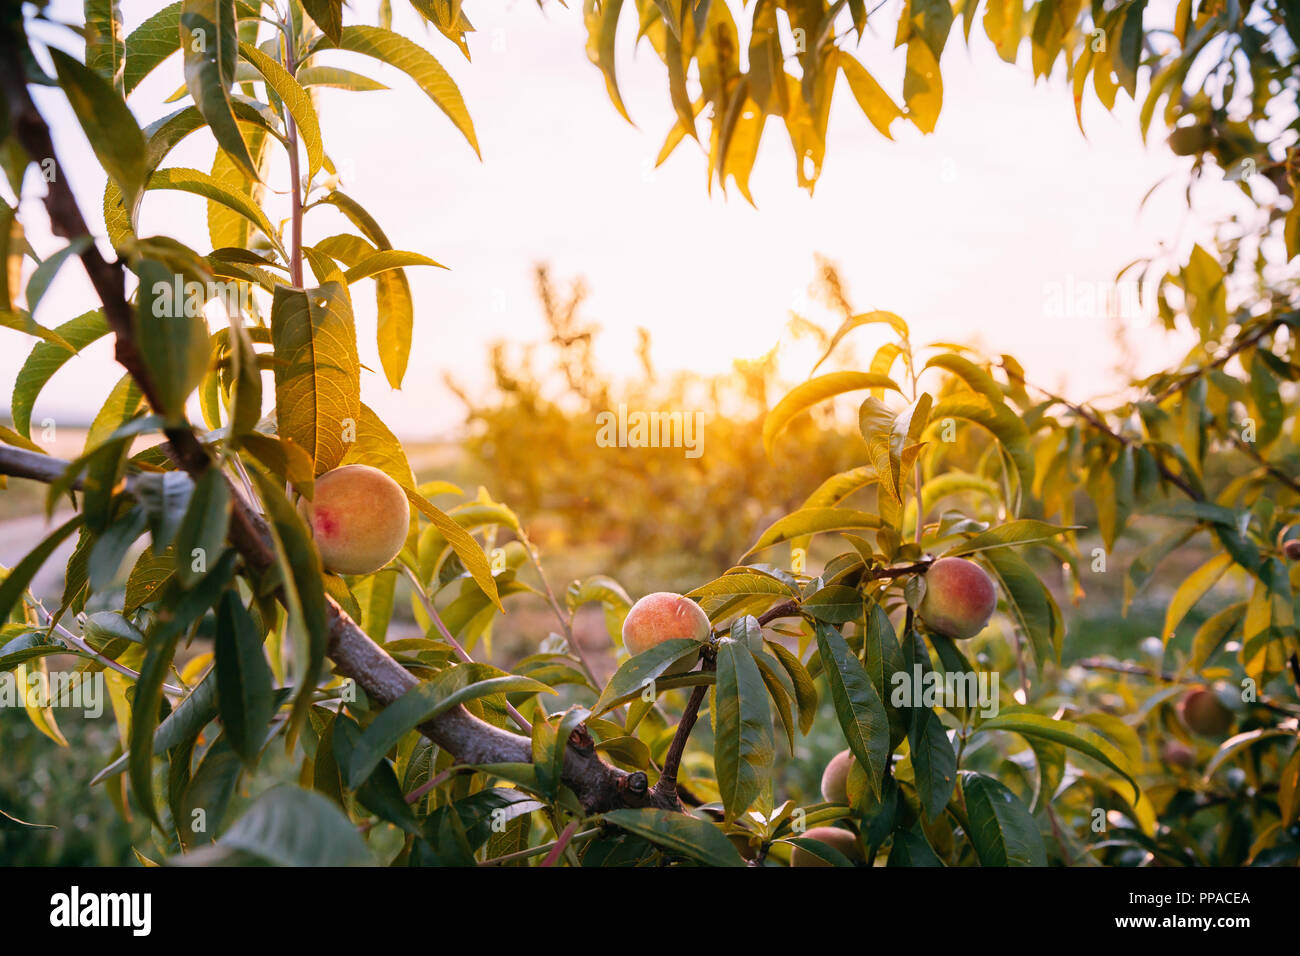 Peach Tree With Ripening Peaches In Spanish Rural Garden At Spring Sunset Time. Stock Photo